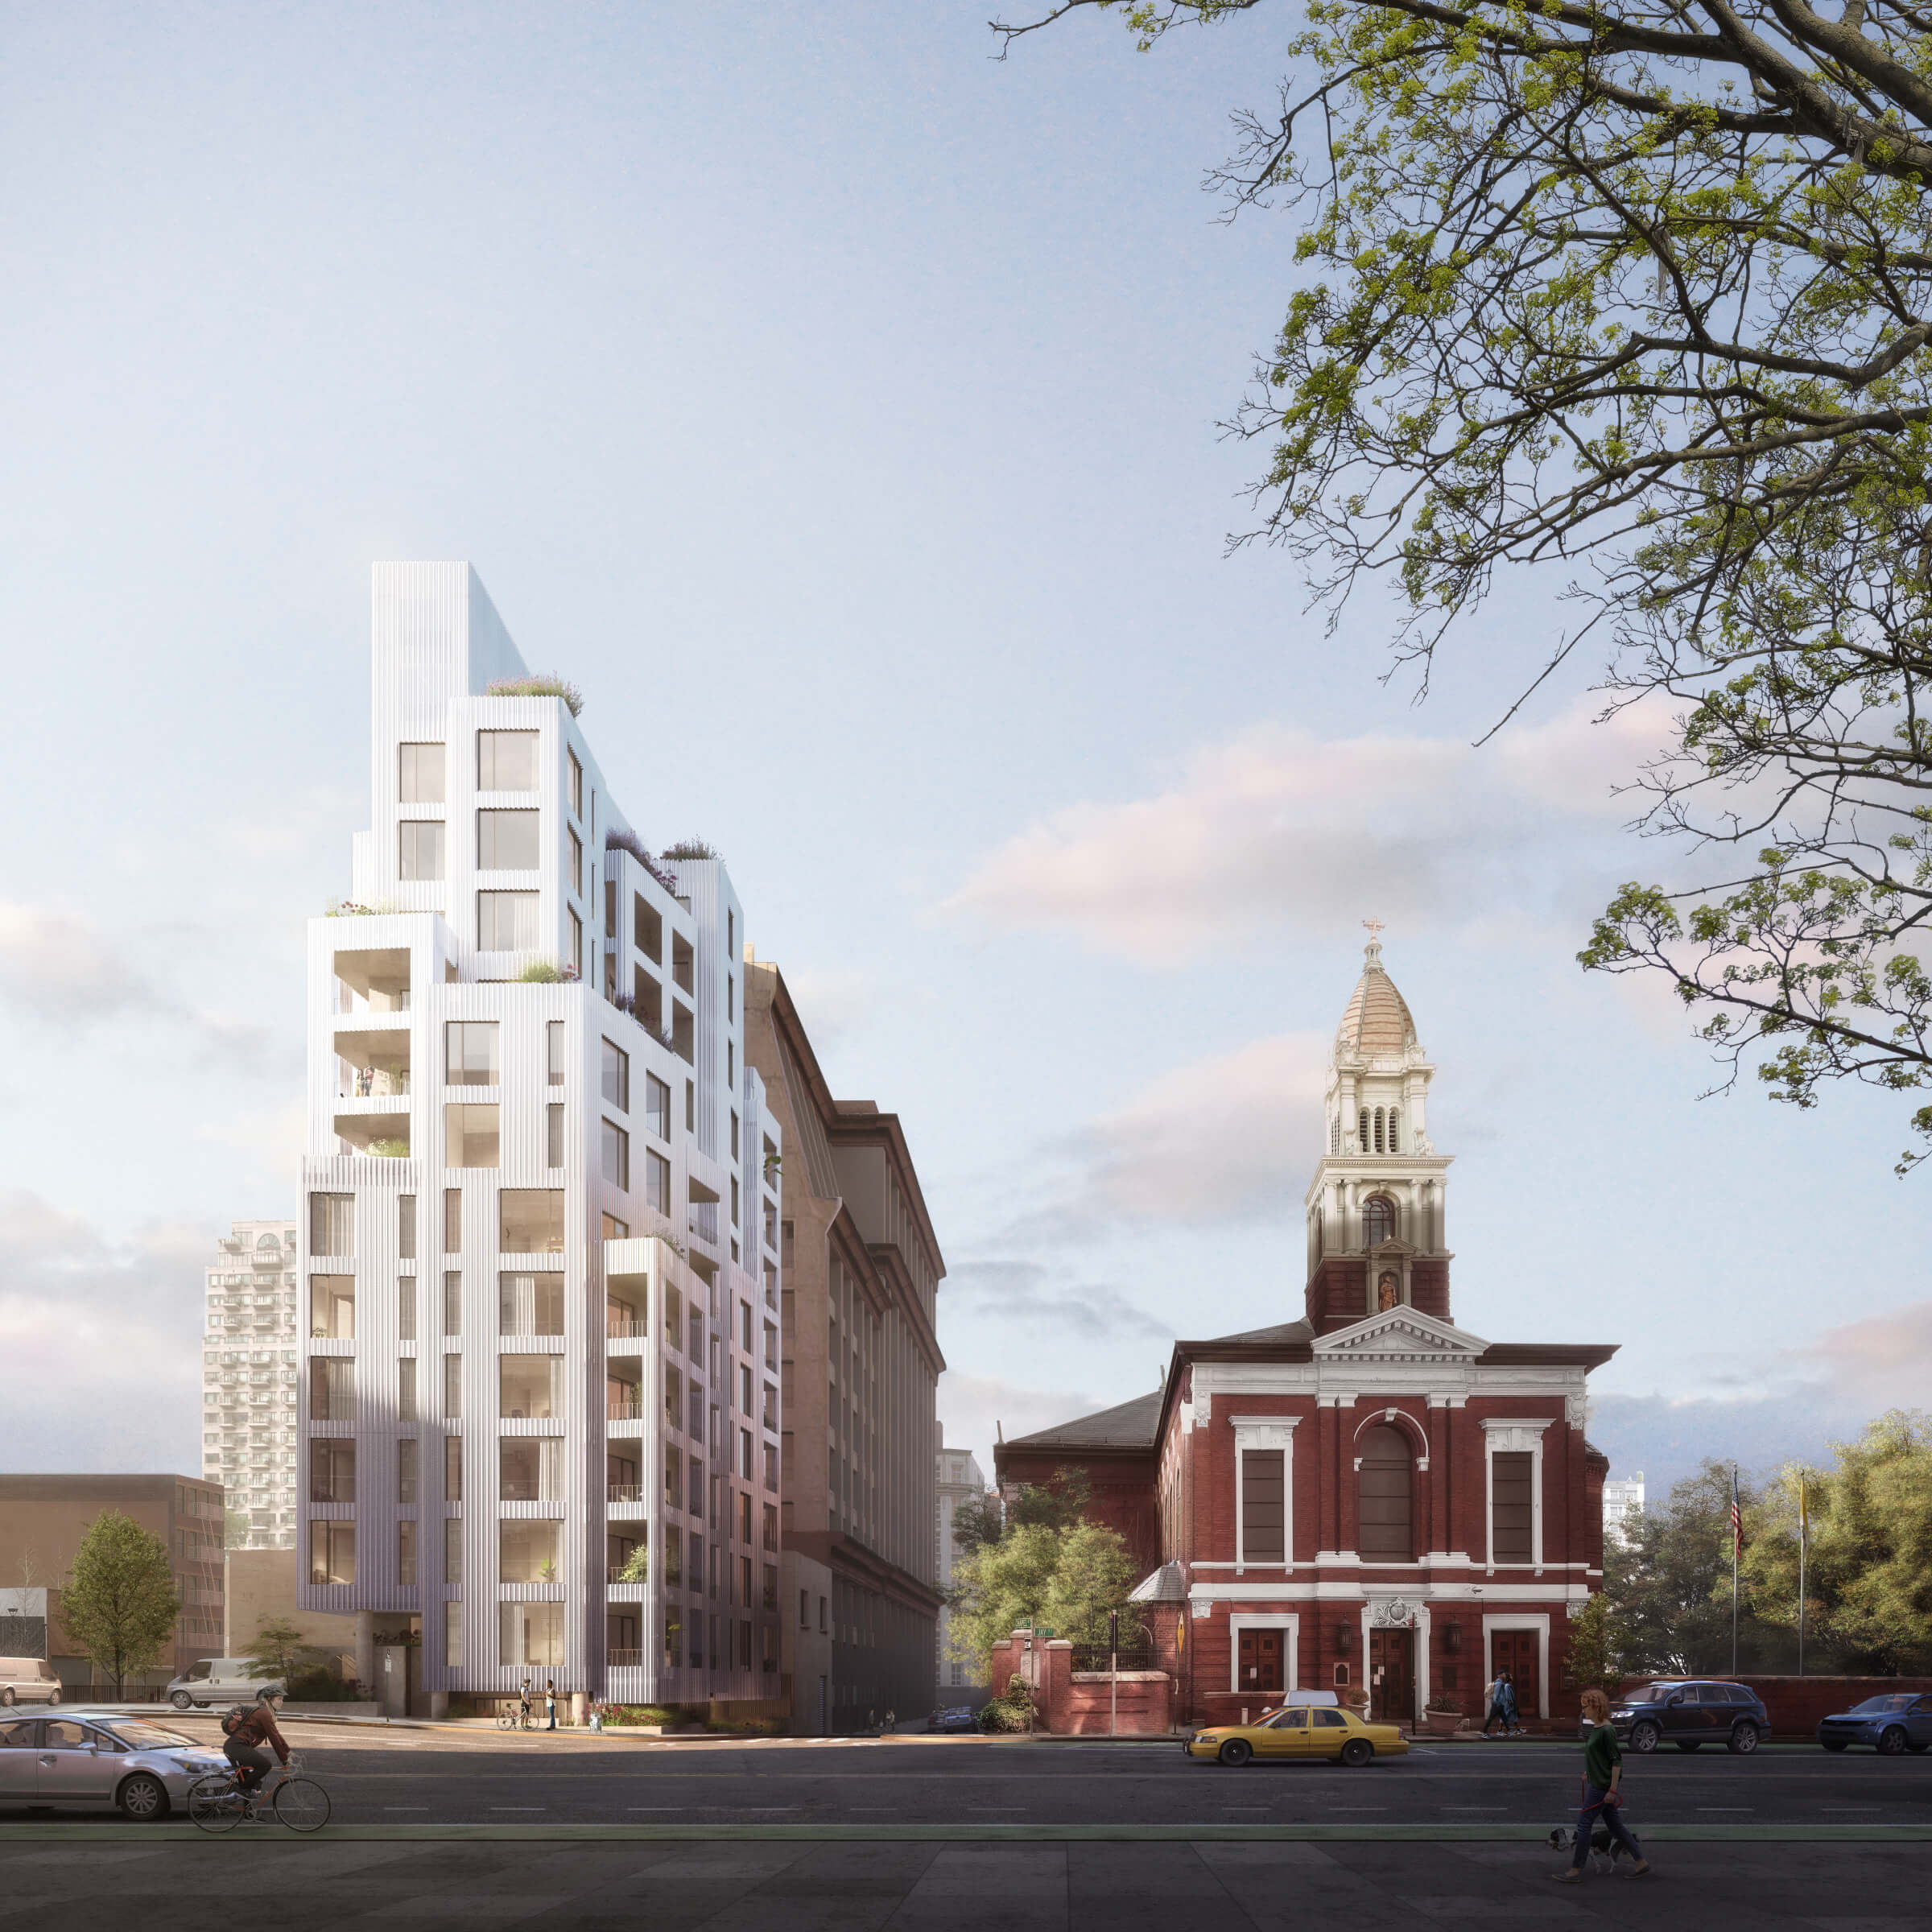 Skyline rendering of a tall apartment building next to a church